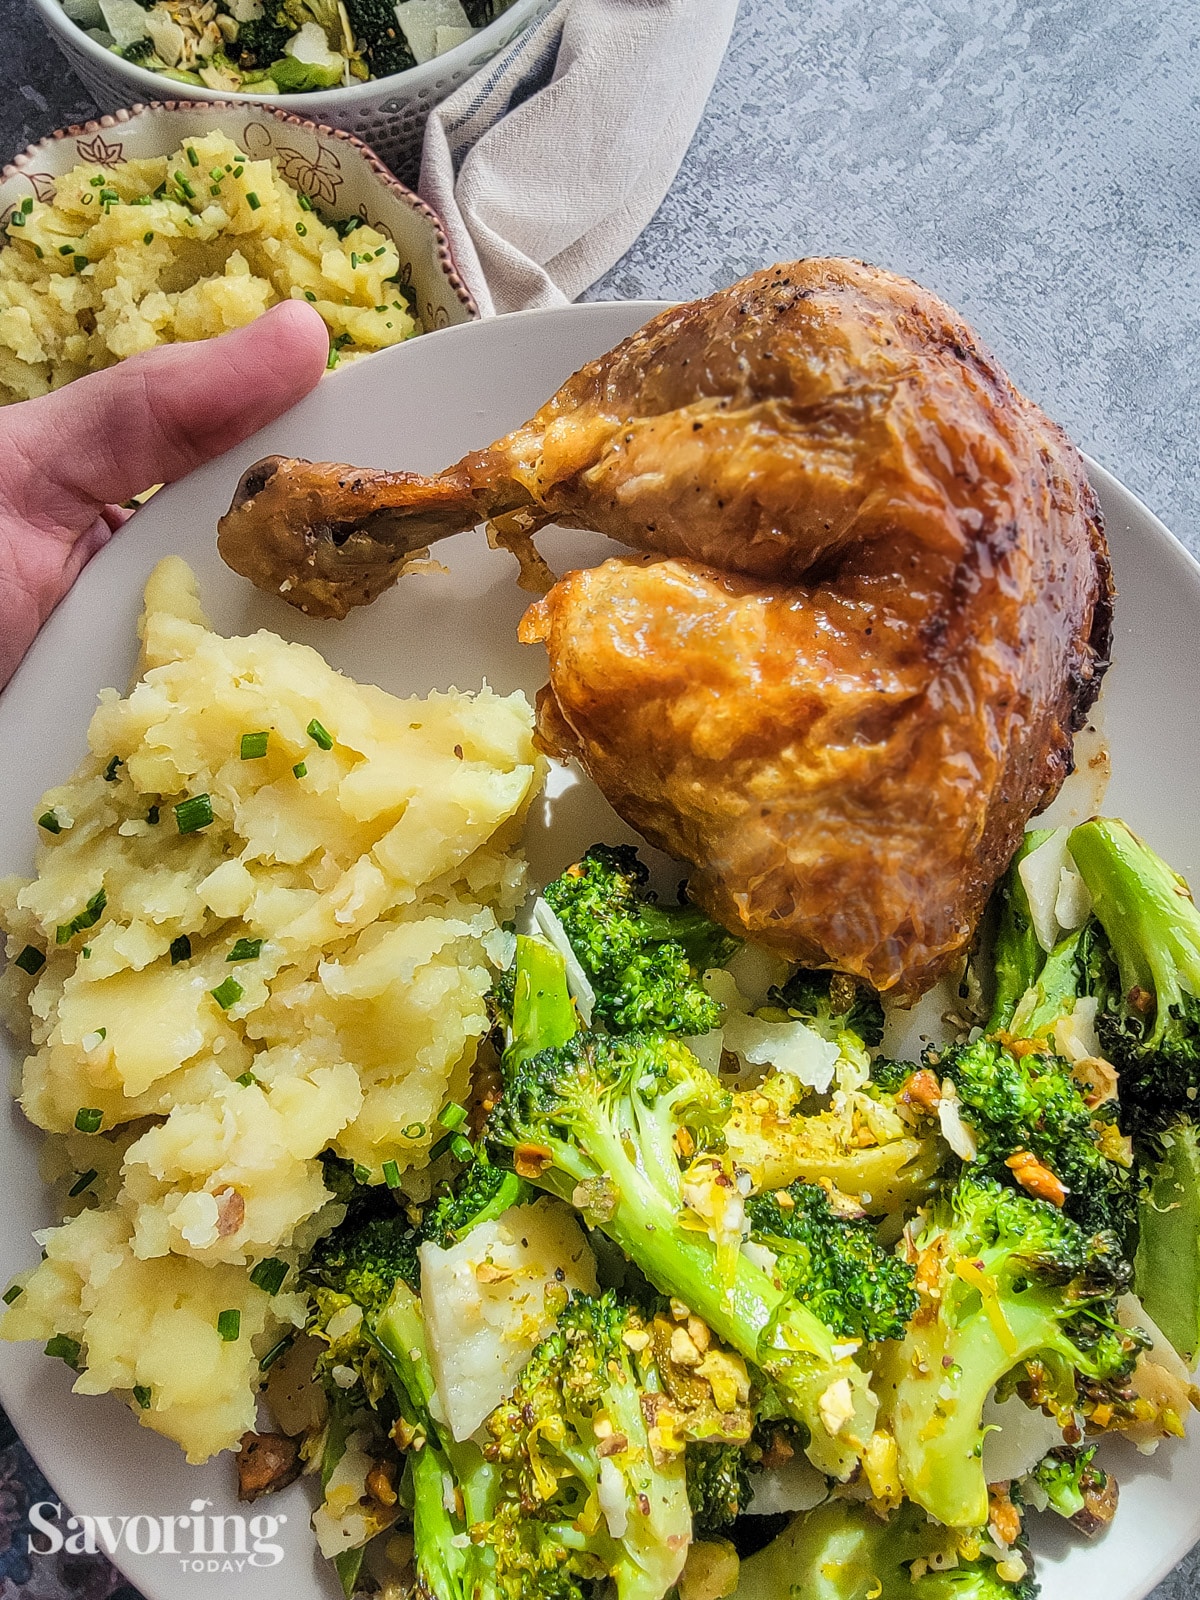 A hand holding a plate of roasted chicken, broccoli, and mashed sweet potatoes